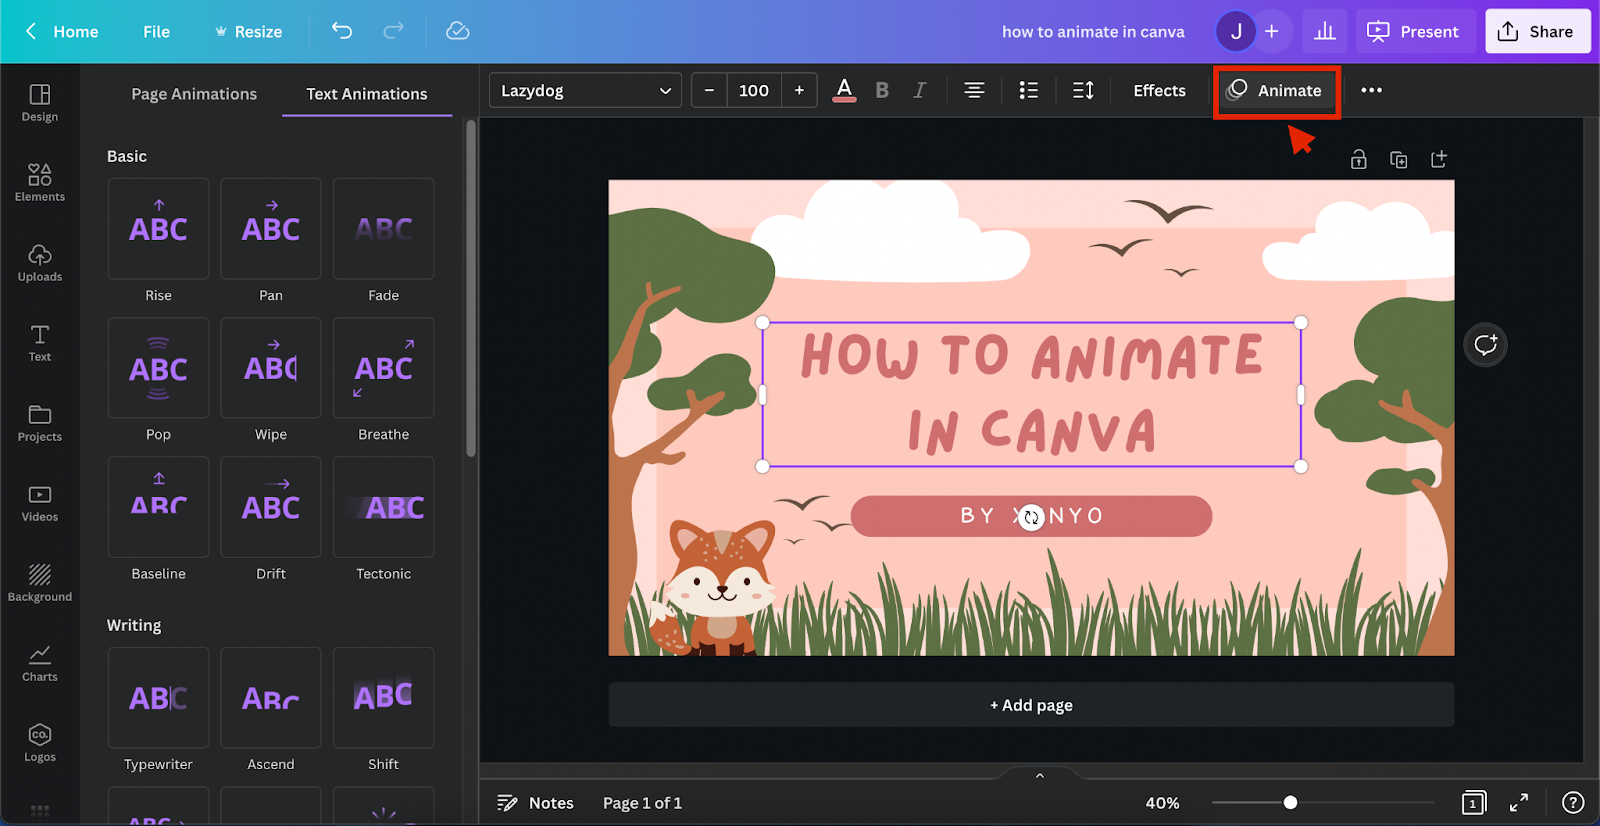 HOW TO CREATE ANIMATED GIFS WITH CANVA 